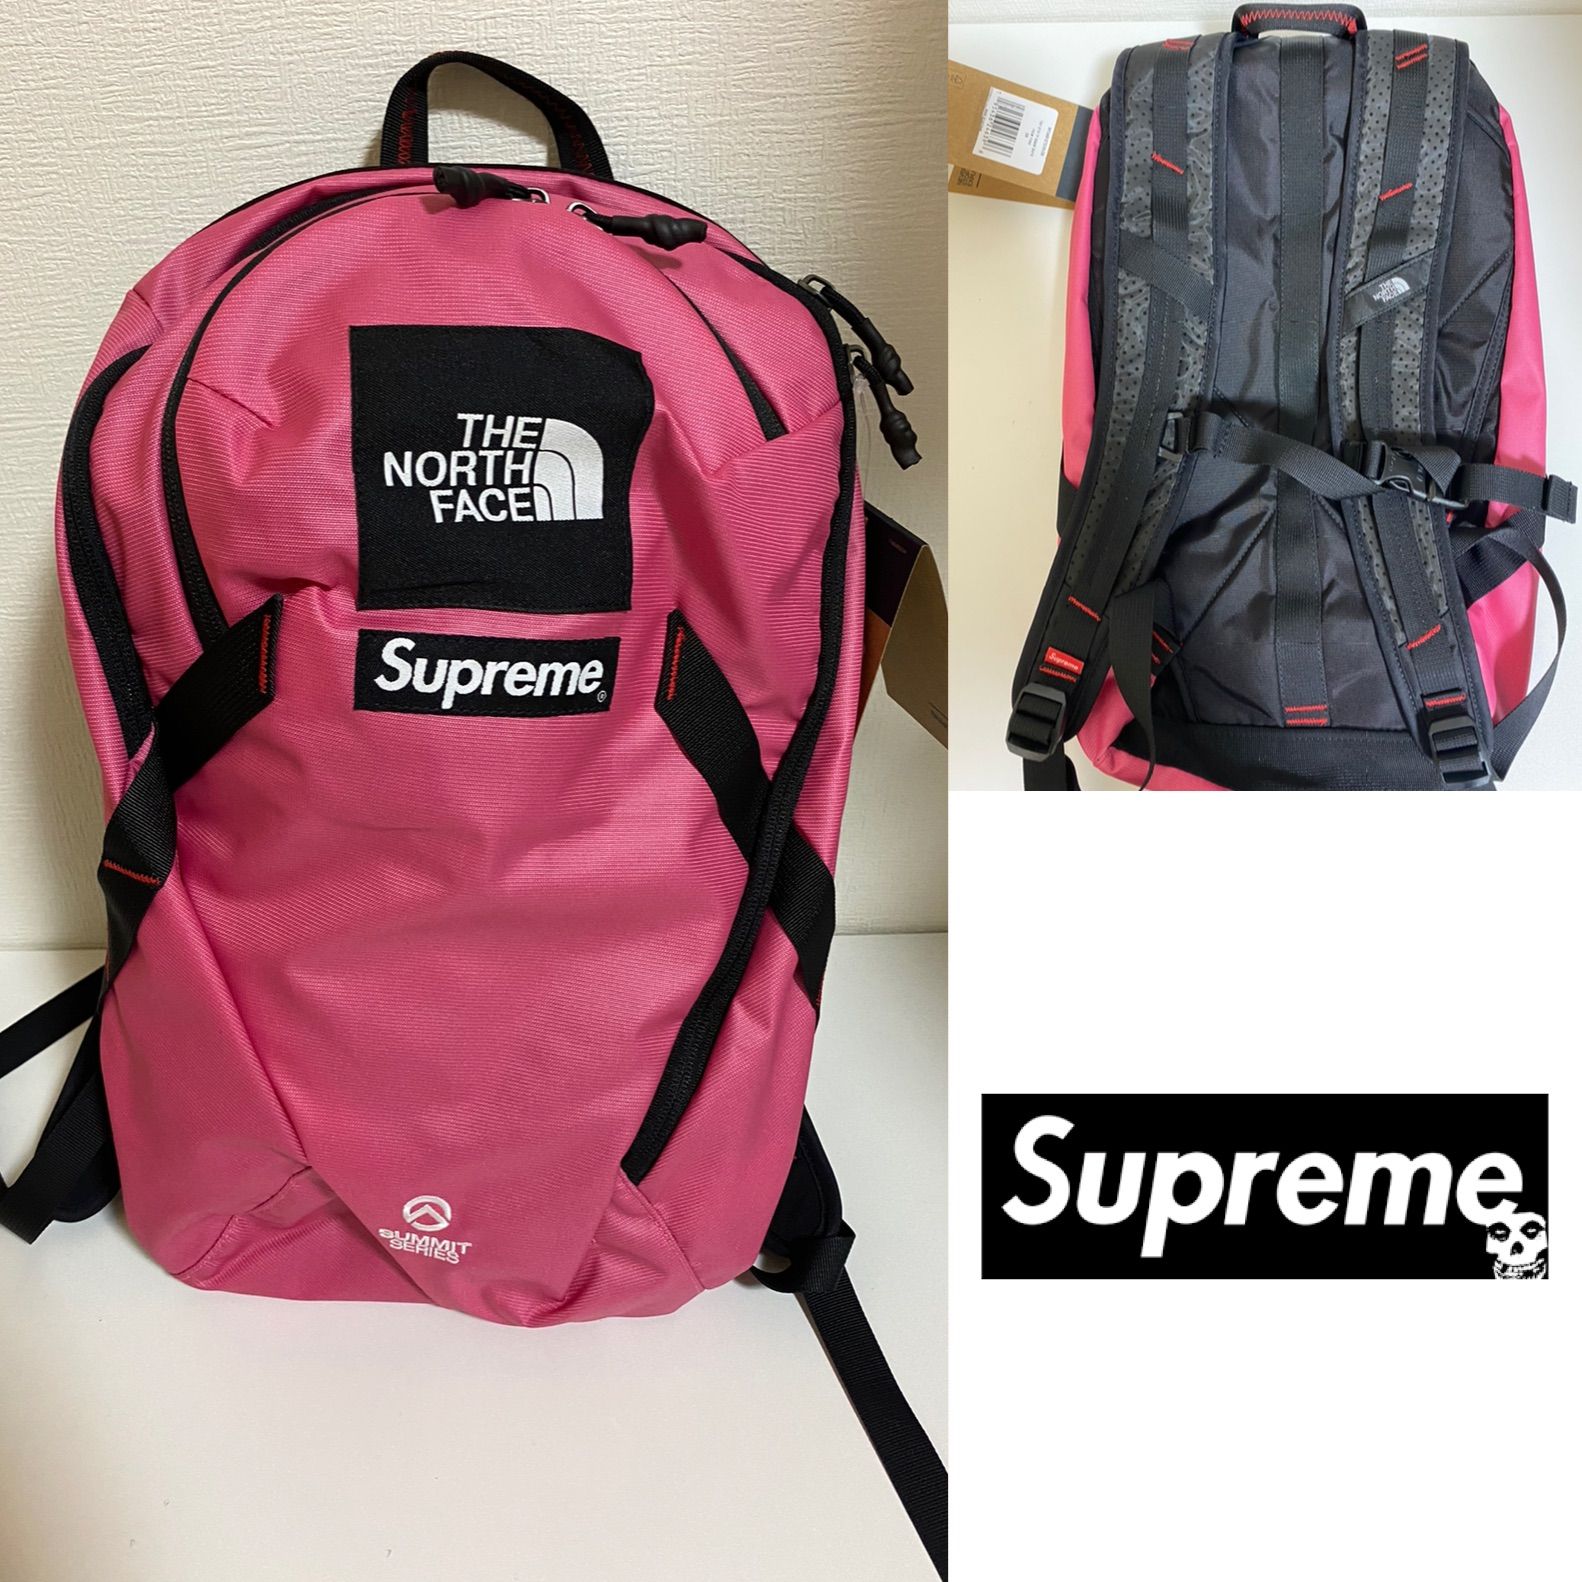 THE NORTH FACE 14SS バックパック　Supremeコラボ